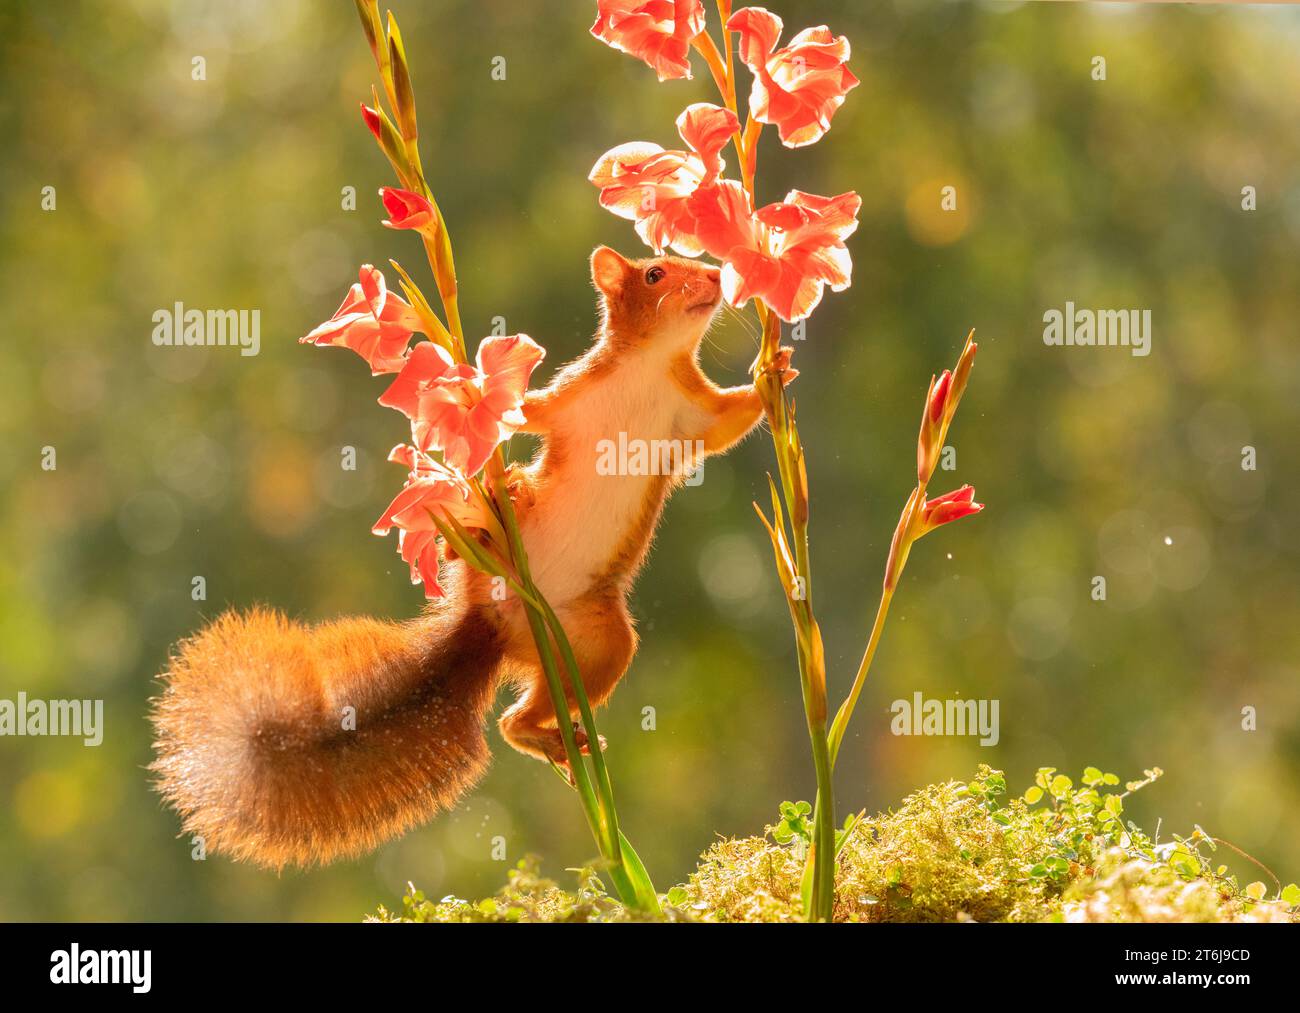 Red Squirrel hold a Gladiolus stem with flowers Stock Photo